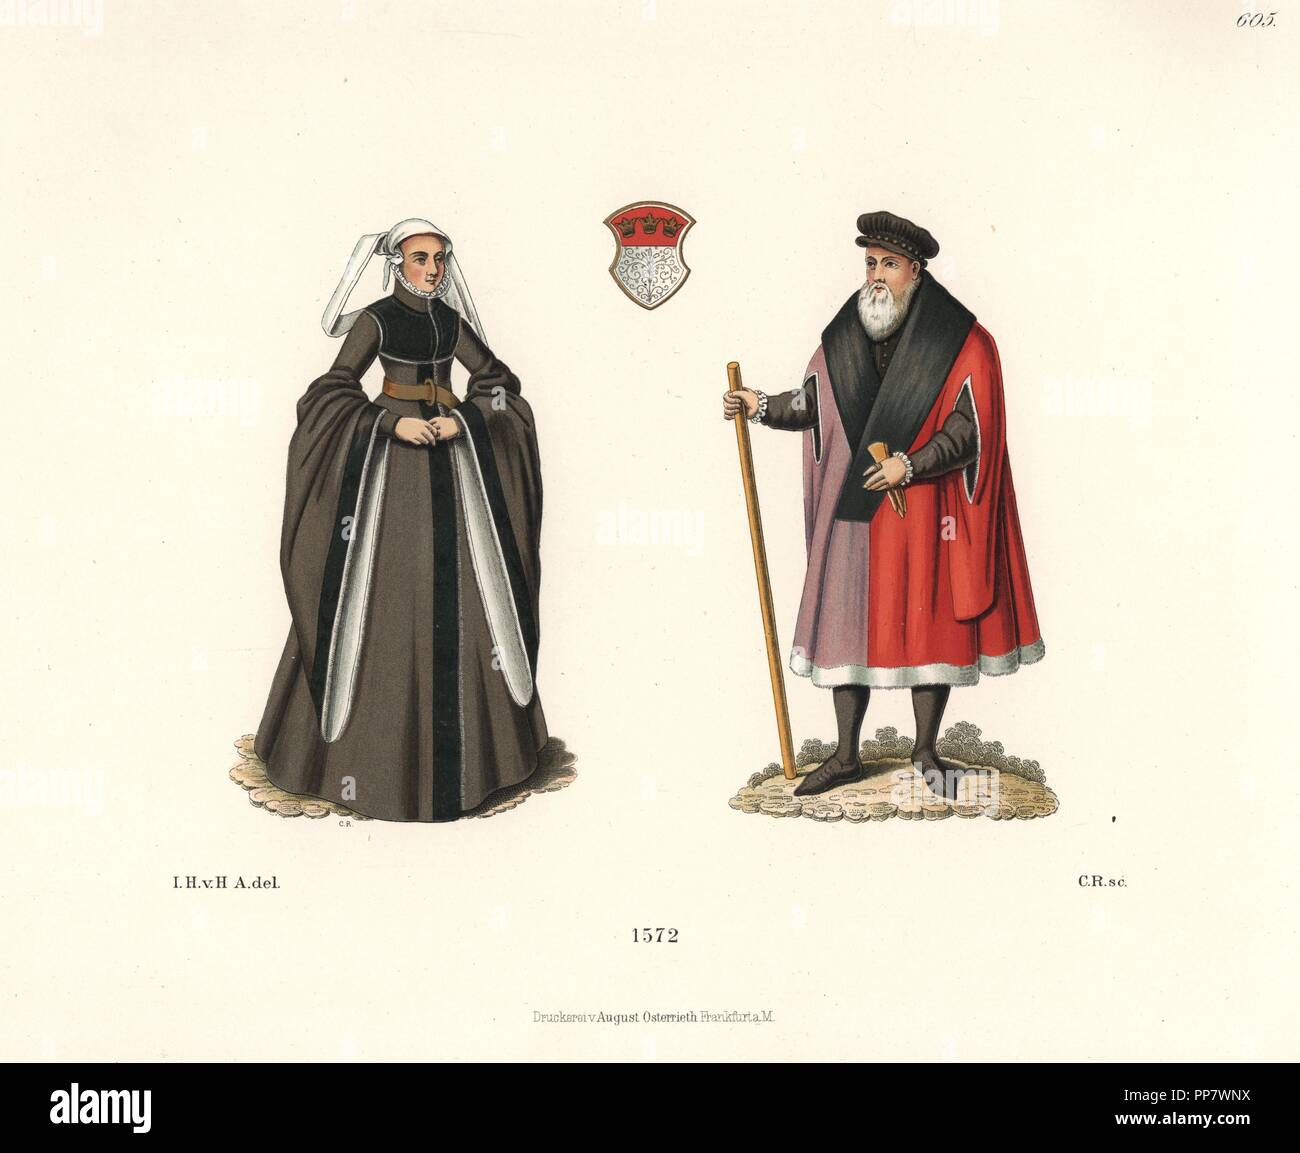 Bartholomeus Brun, burgher, and woman in veil and full-sleeved dress with gold belt, Cologne, 1572. From the Ducal Library at Darmstadt. Chromolithograph from Hefner-Alteneck's Costumes, Artworks and Appliances from the Middle Ages to the 17th Century, Frankfurt, 1889. Illustration by Dr. Jakob Heinrich von Hefner-Alteneck, lithographed by C. Regnier. Dr. Hefner-Alteneck (1811-1903) was a German museum curator, archaeologist, art historian, illustrator and etcher. Stock Photo